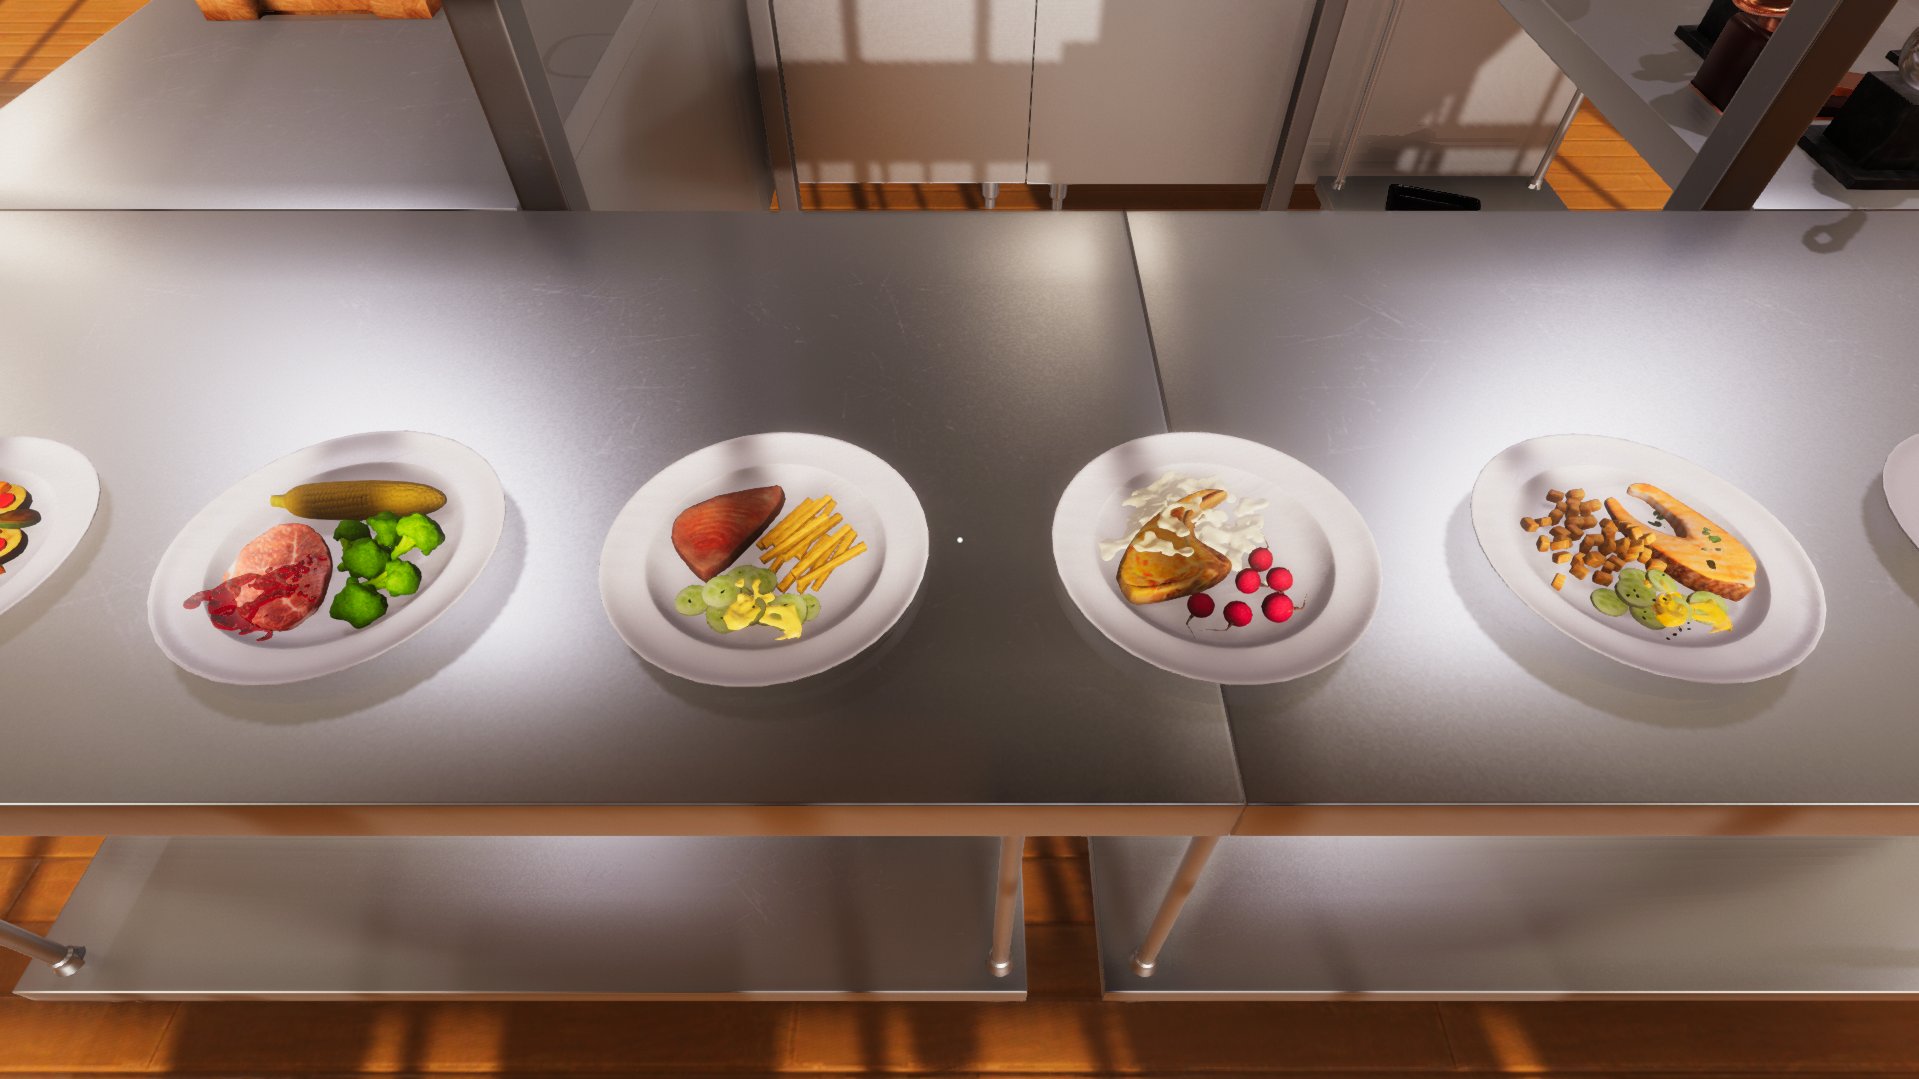 ✨ Cooking Simulator ✨ - 👩‍🍳Become a chef and cook dishes your way👨‍🍳  Nobody will get in your way if you want to make a 🥗salad on the floor and  cut